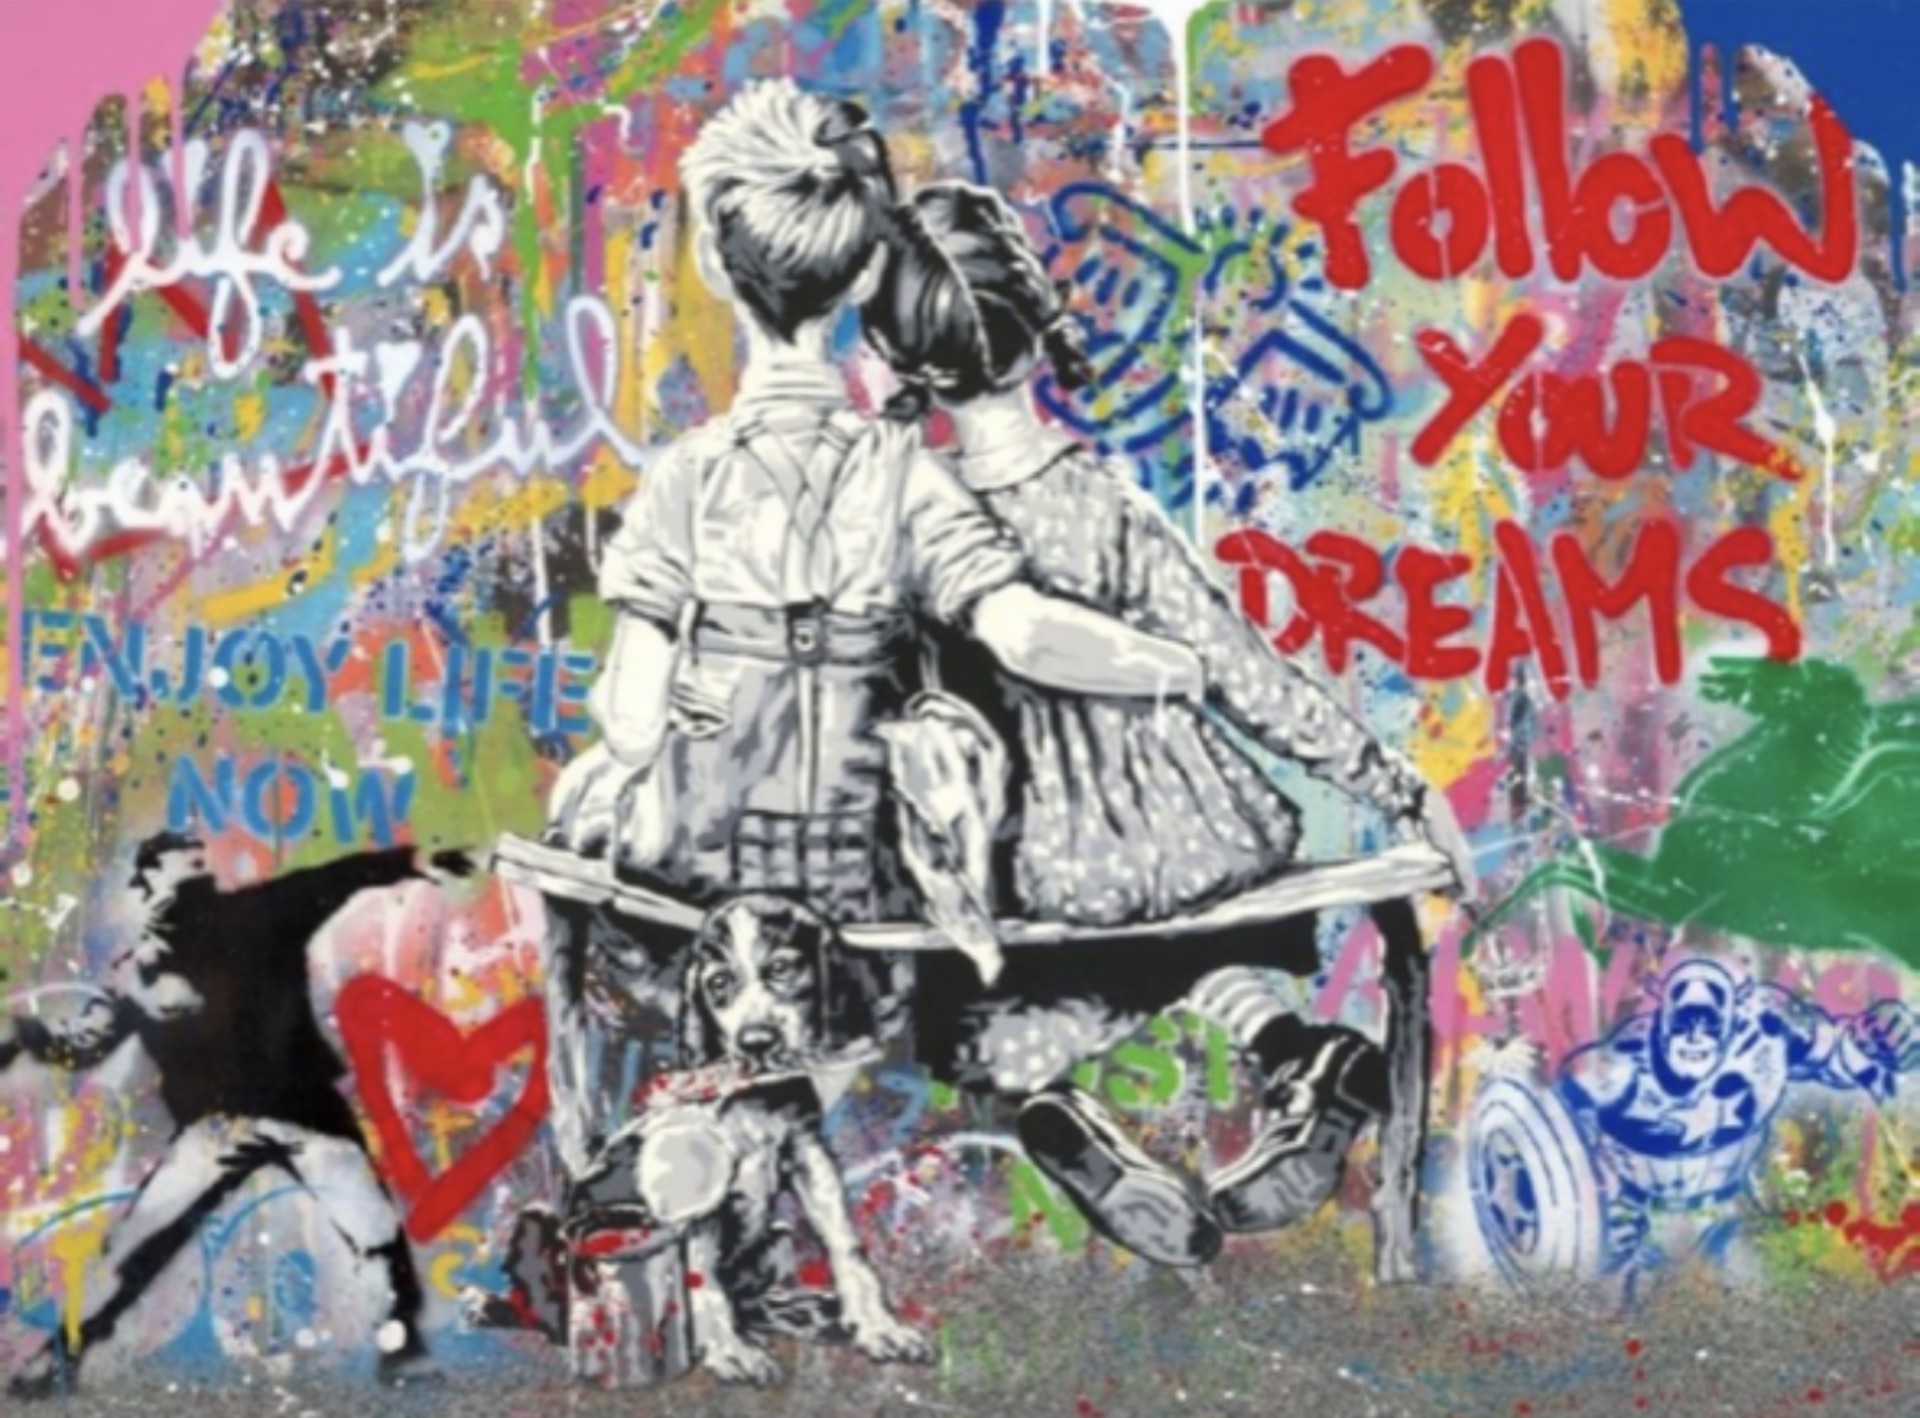 Work Well Together-COMMISSION- Framed by Mr. Brainwash